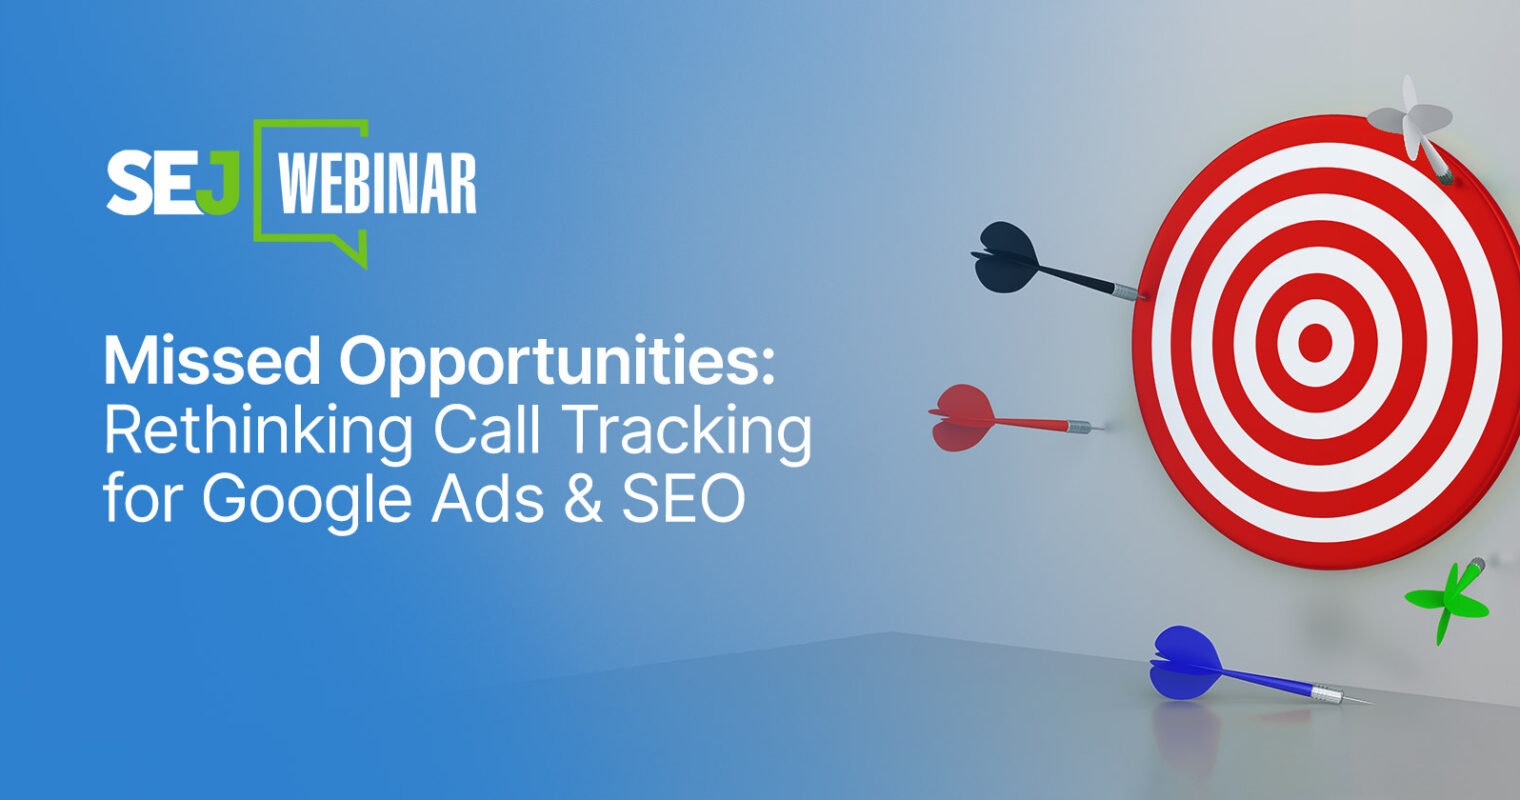 Convert Leads Faster With Call Tracking [Webinar]